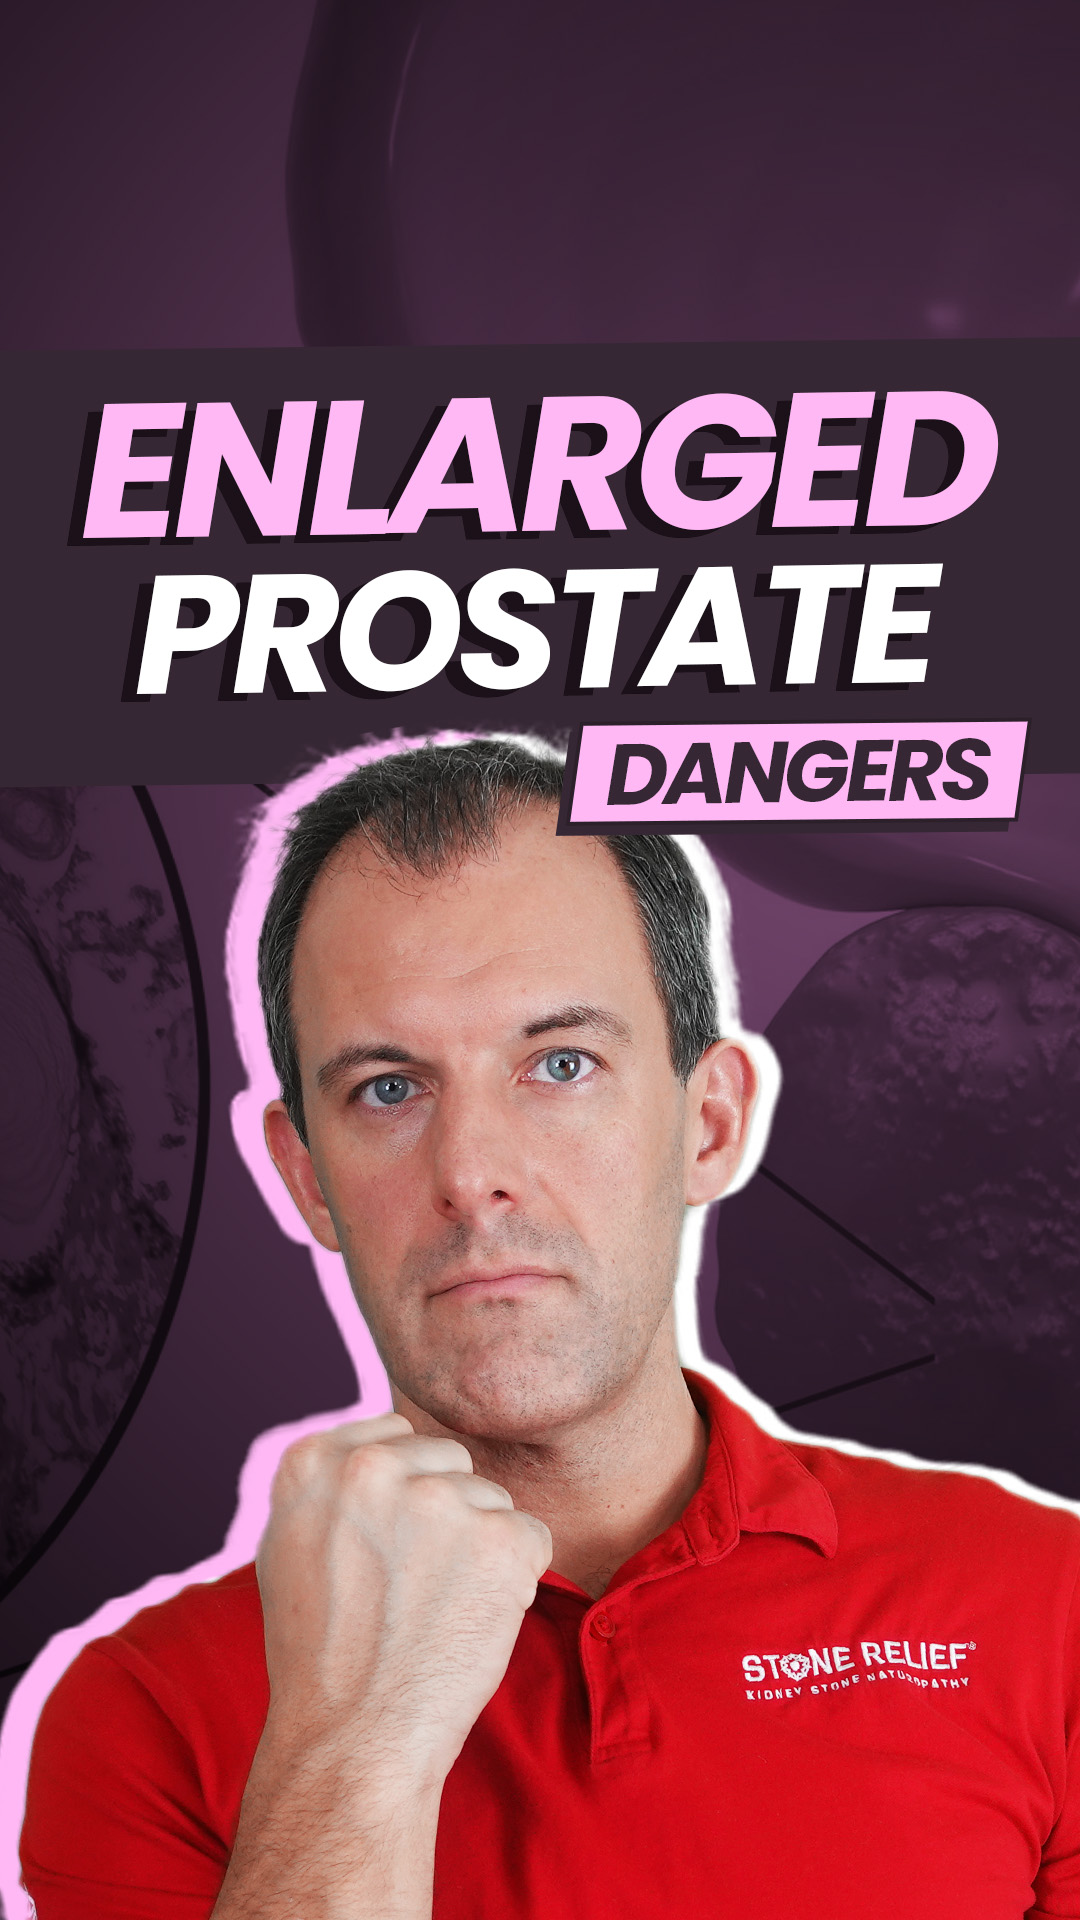 Enlarged Prostate? You are at Risk of Kidney Stones!